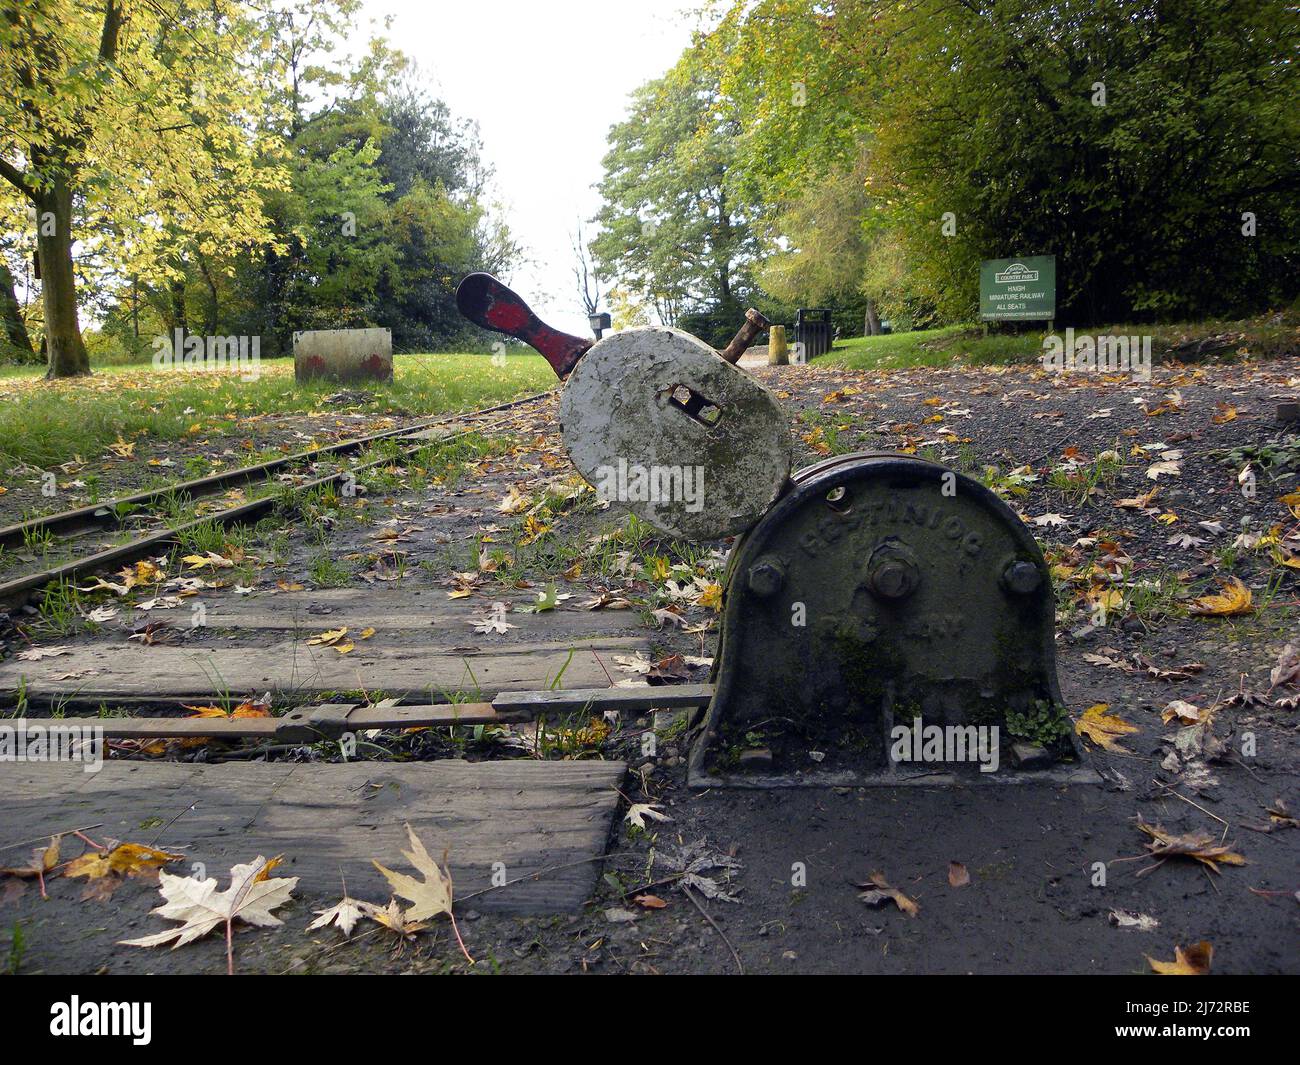 HAIGH COUNTRY PARK. WIGAN. ENGLAND. 21-10-16. A points switch for the park's miniature railway. Stock Photo